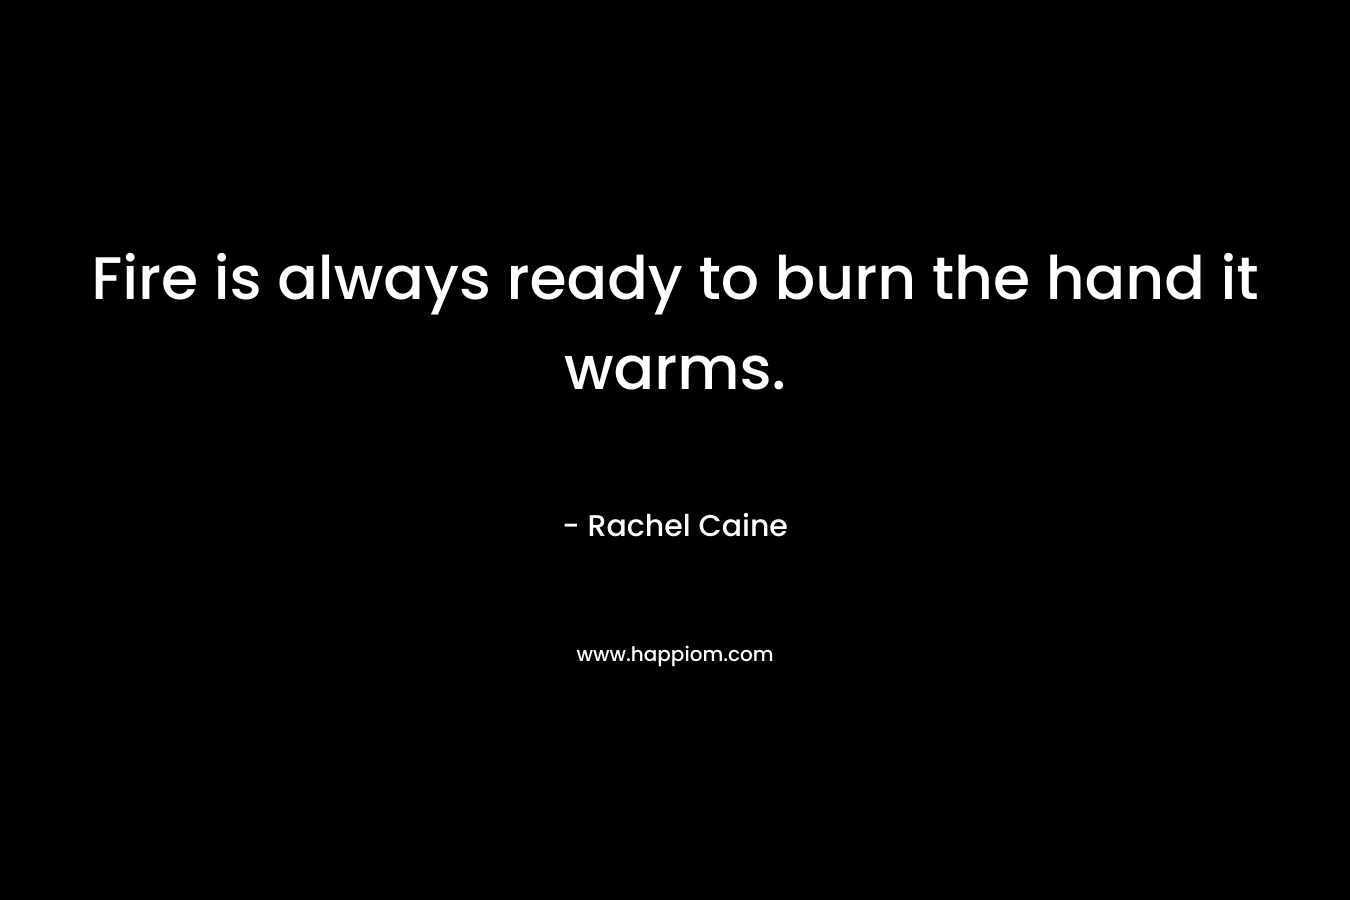 Fire is always ready to burn the hand it warms. – Rachel Caine